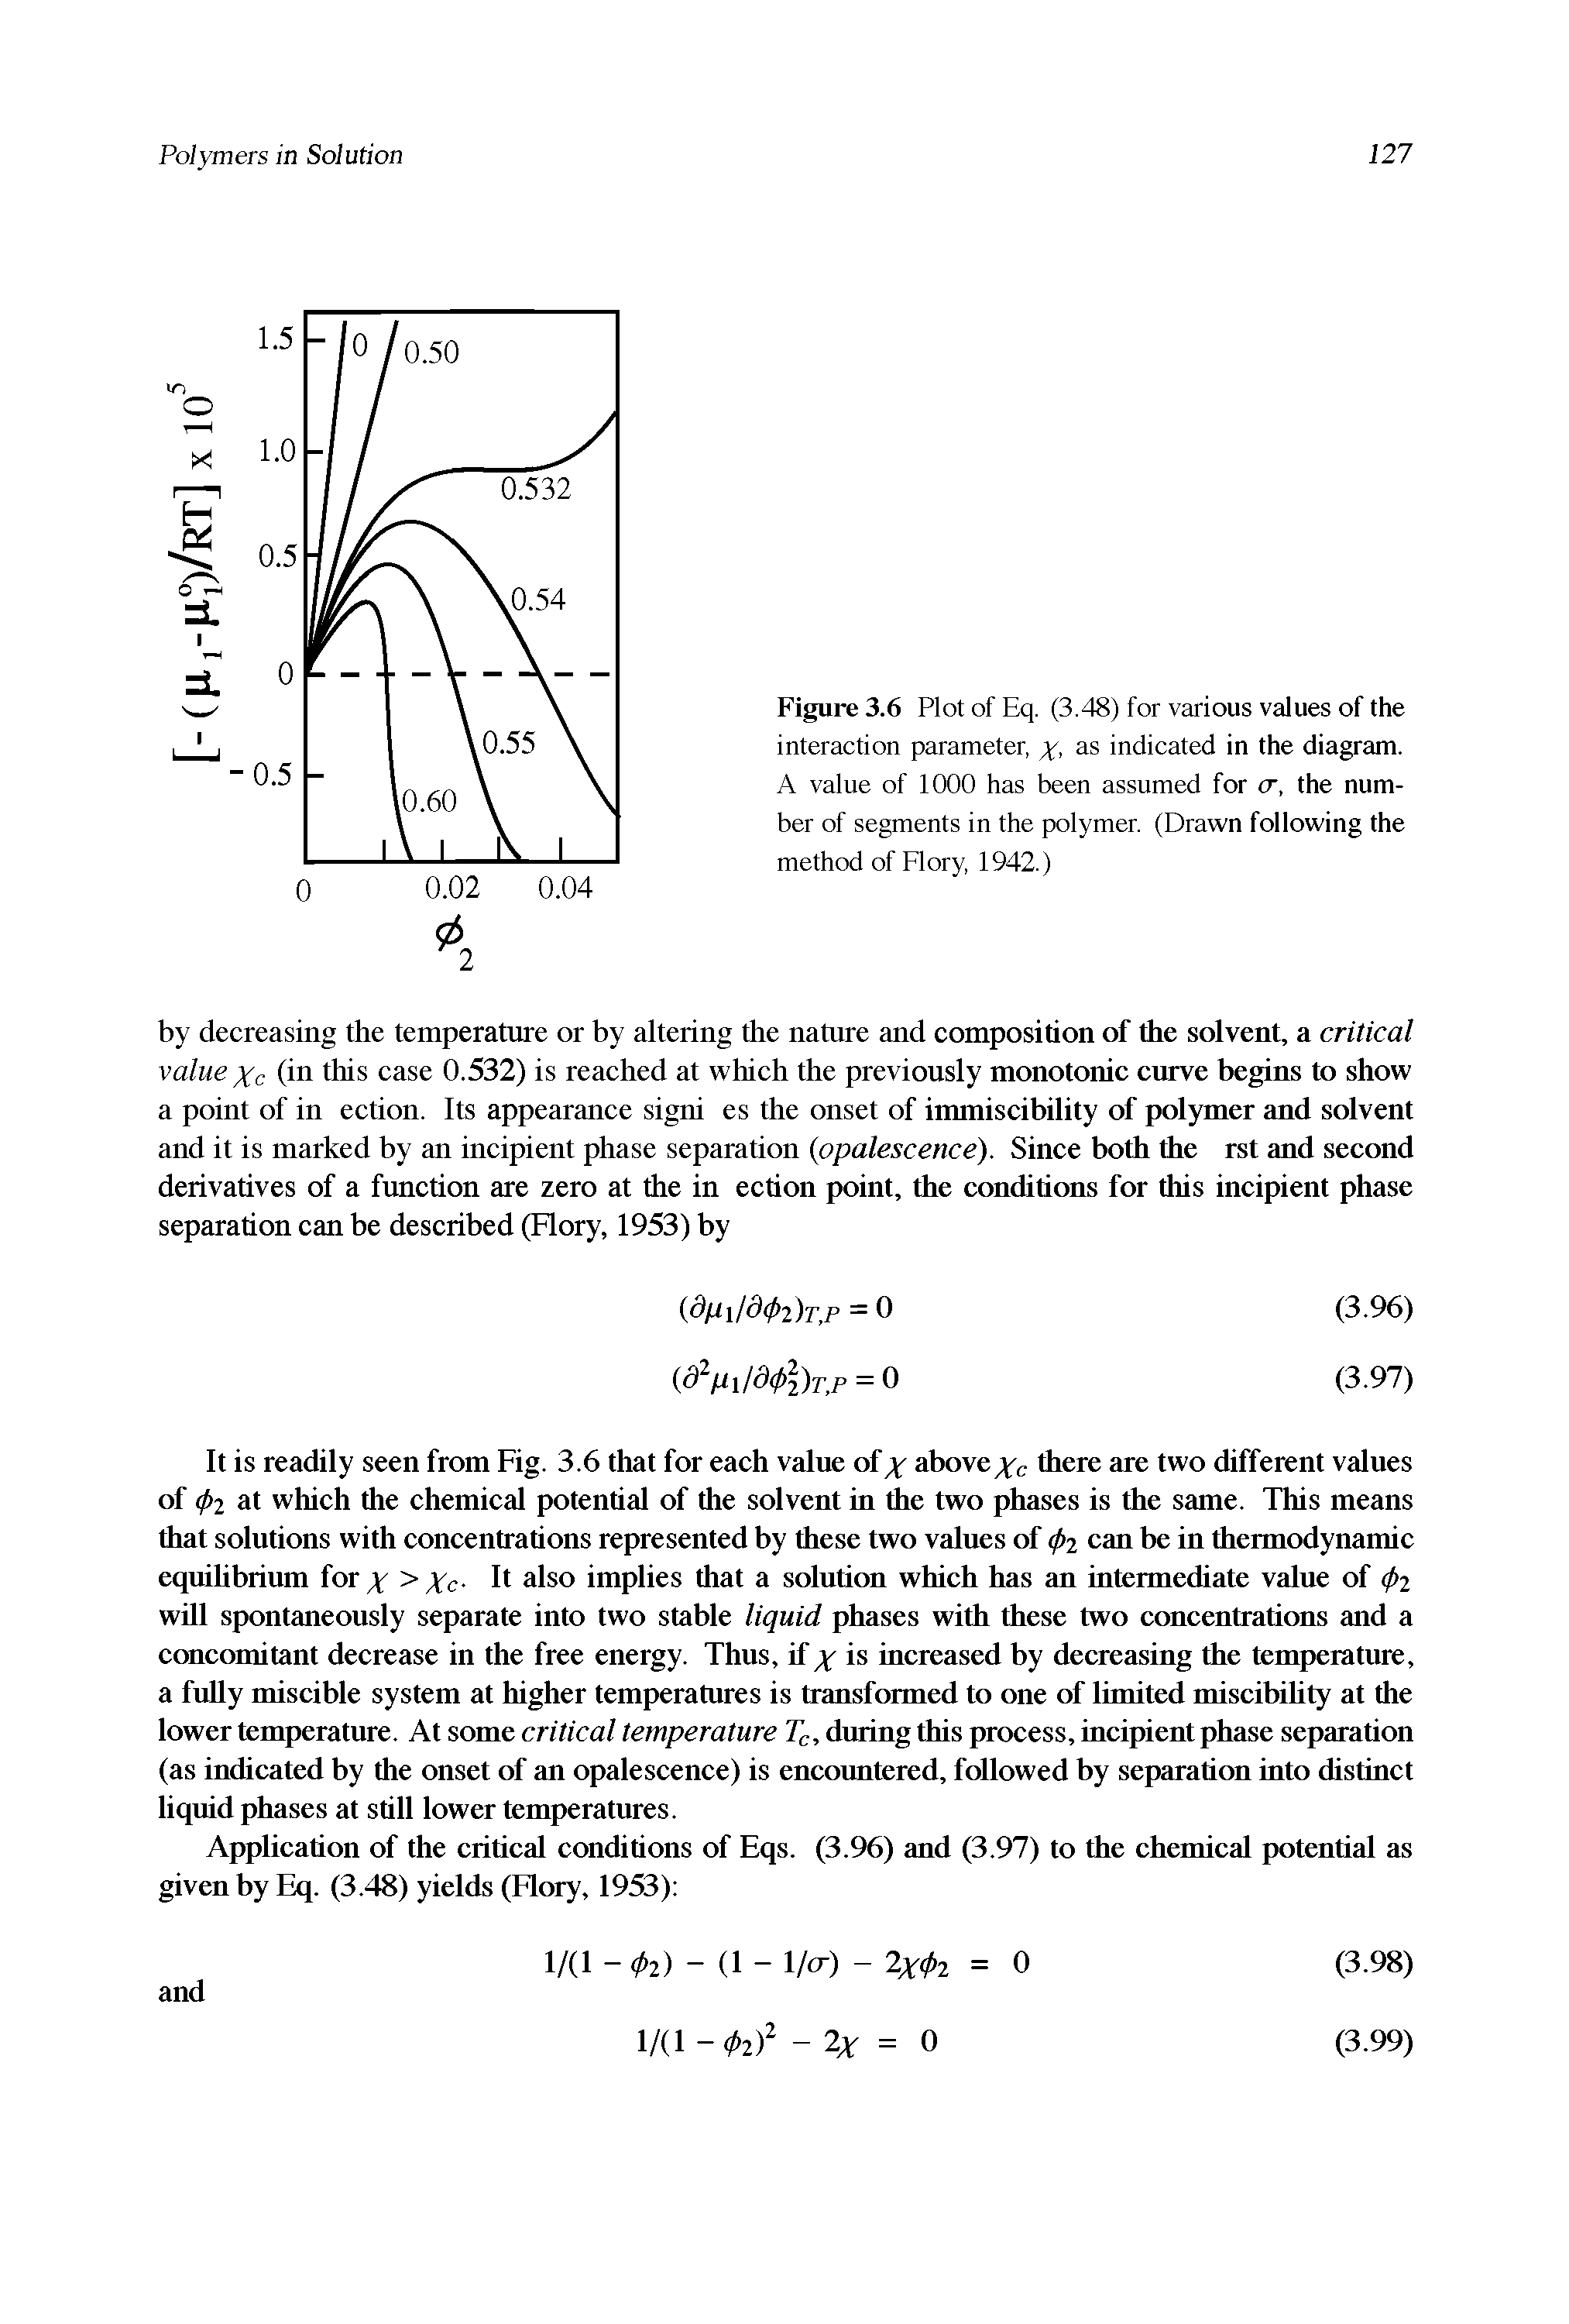 Figure 3.6 Plot of Eq. (3.48) for various values of the interaction parameter, x> as indicated in the diagram. A value of 1000 has been assumed for tr, the number of segments in the polymer. (Drawn following the method of Flory, 1942.)...